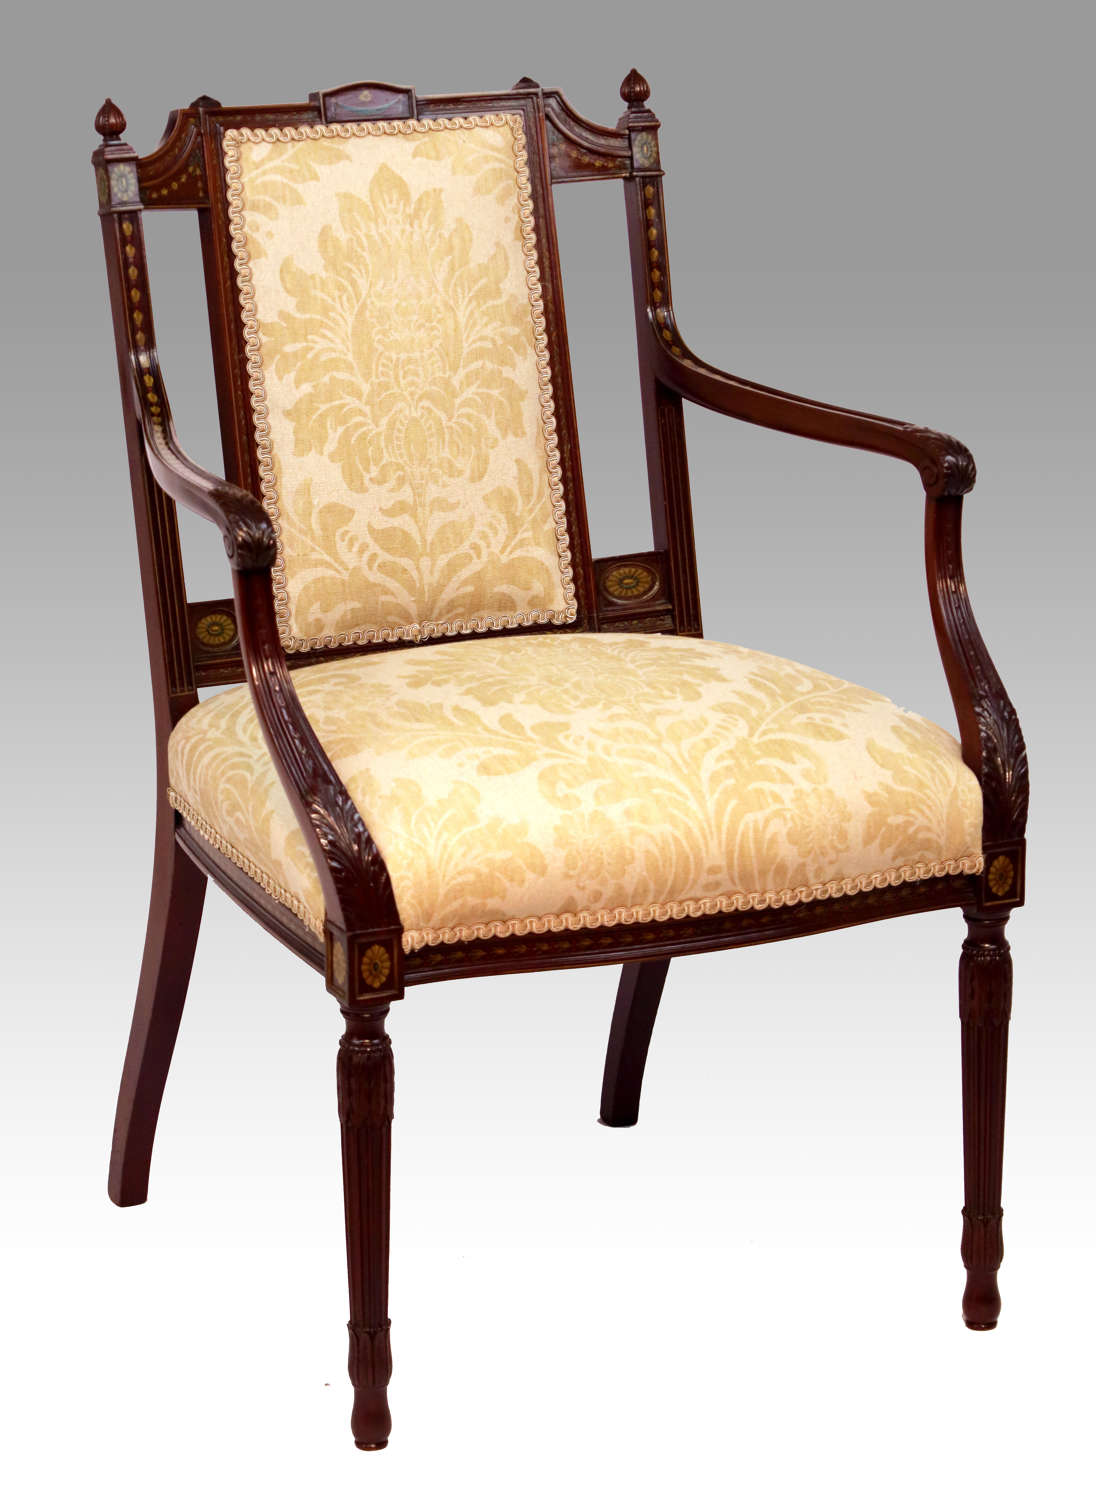 A Excellent Quality Sheraton Revival Upholstered Mahogany Armchair